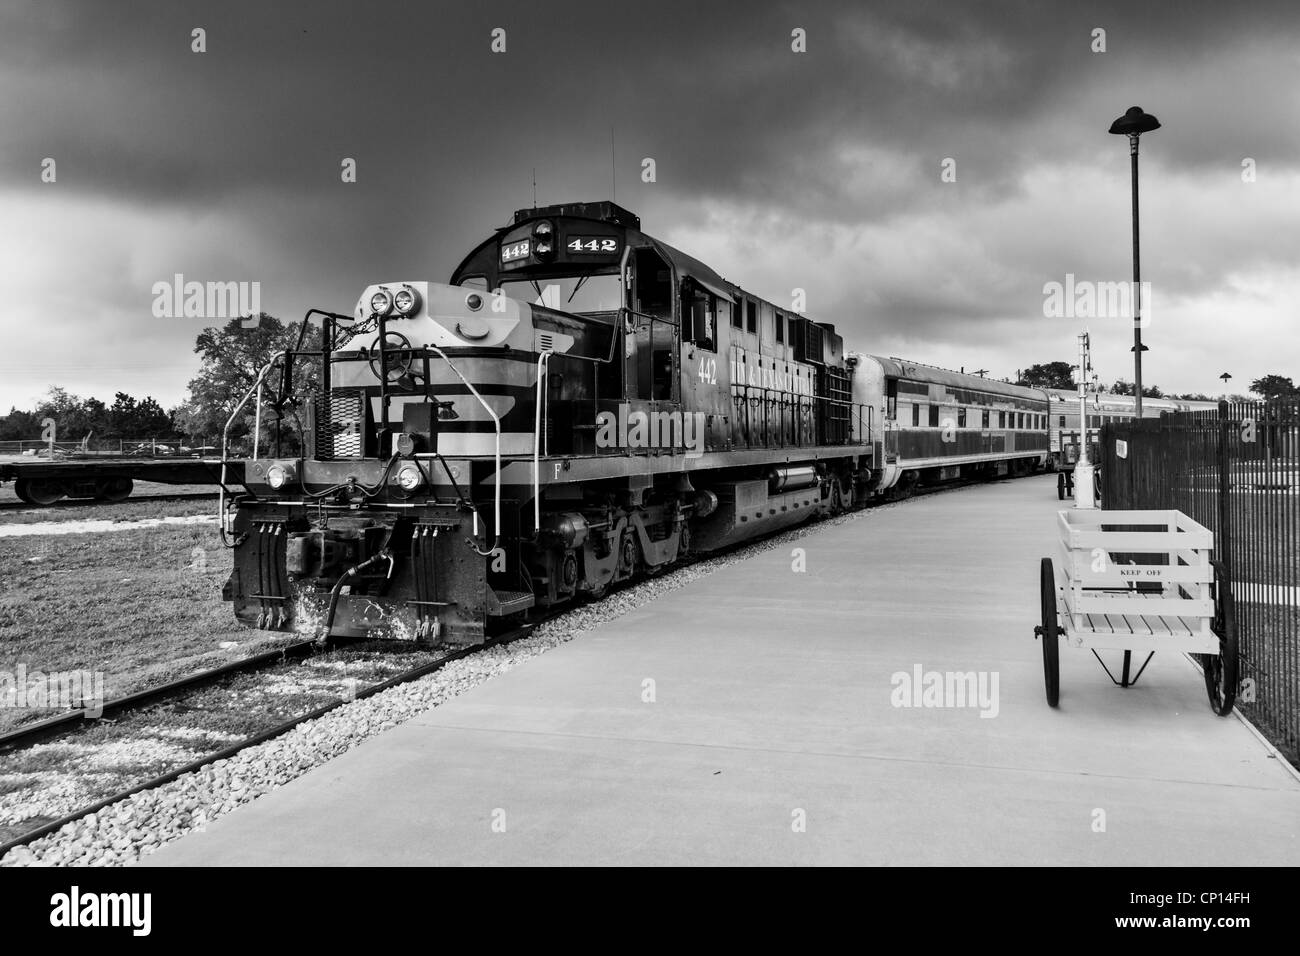 1960 Alco diesel locomotive engine number 442 in active service at Austin & Texas Central Railroad in Austin, Texas. Stock Photo